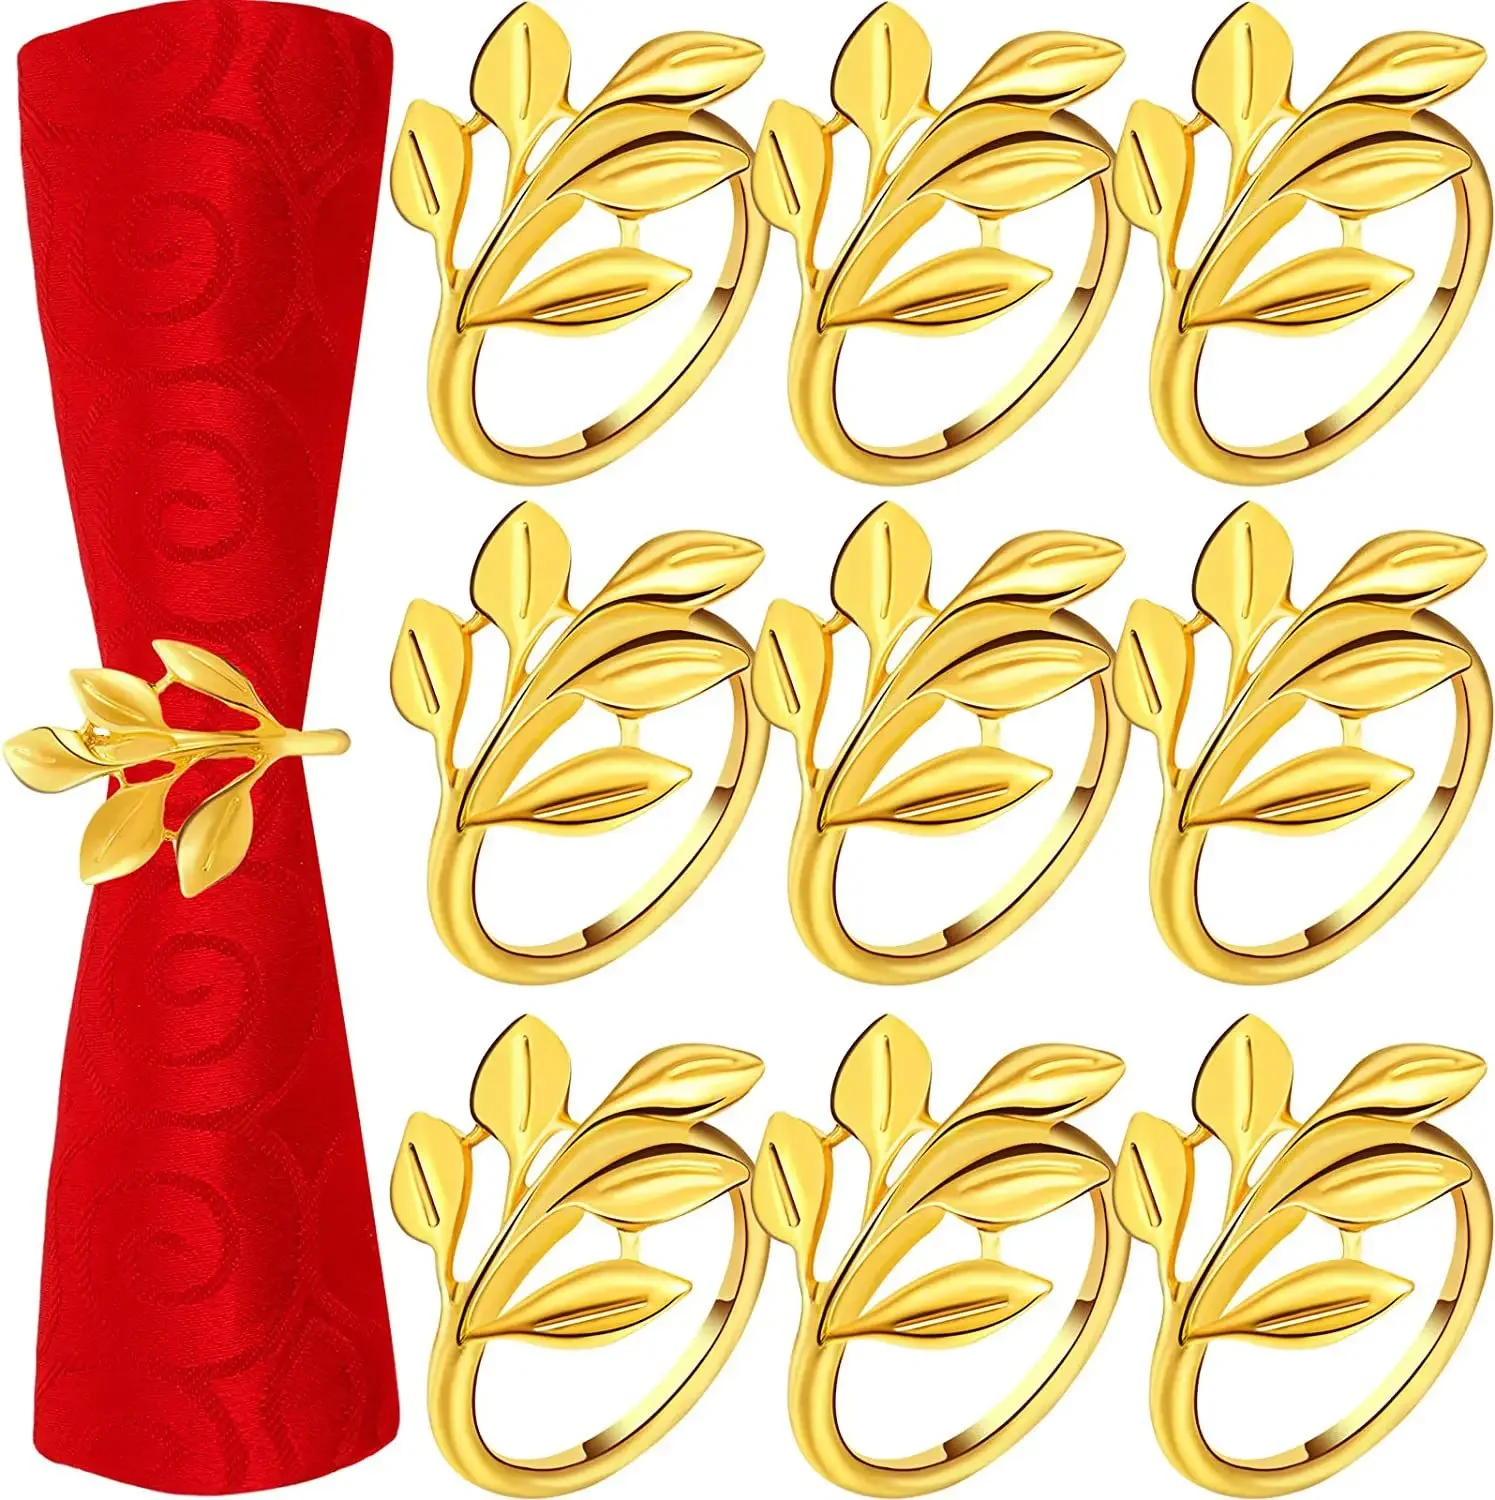 

10Pcs Gold Leaf Napkin Rings for Wedding Fiesta Dinner Feast Napkins Ring Gold Napkin Rings Table Decorations in The Hotel